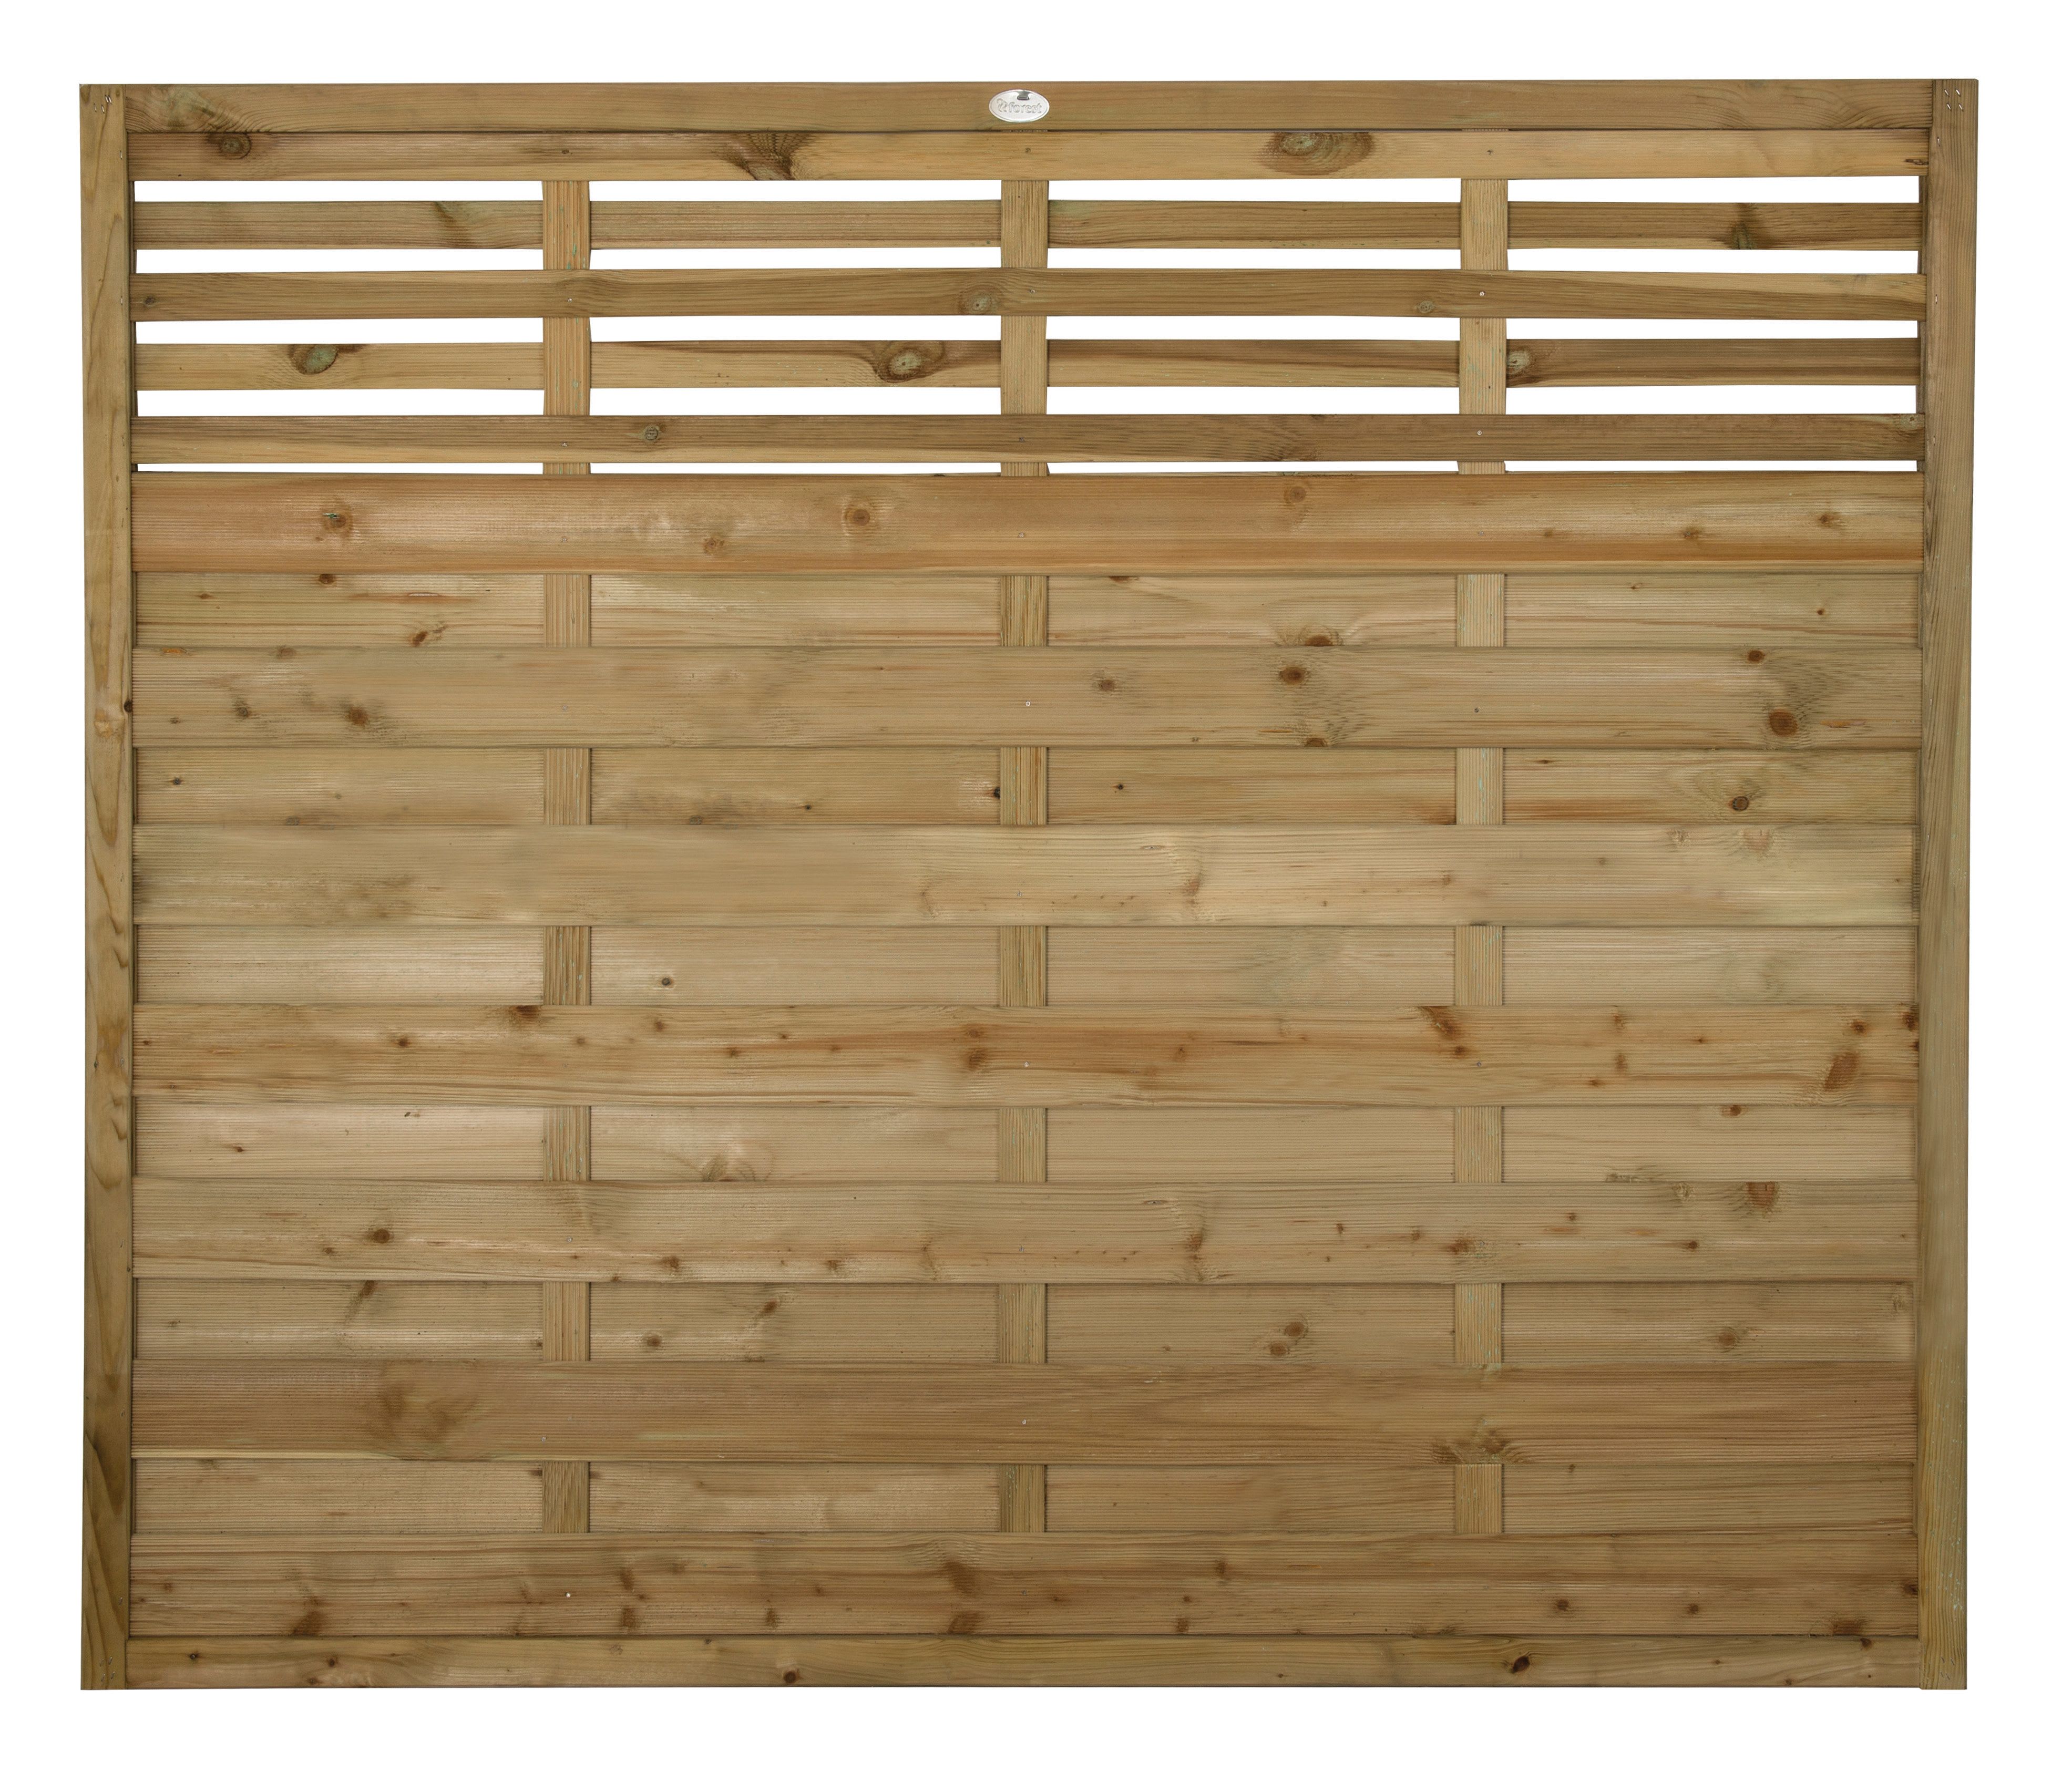 Forest Garden Kyoto Fence Panel - 6 x